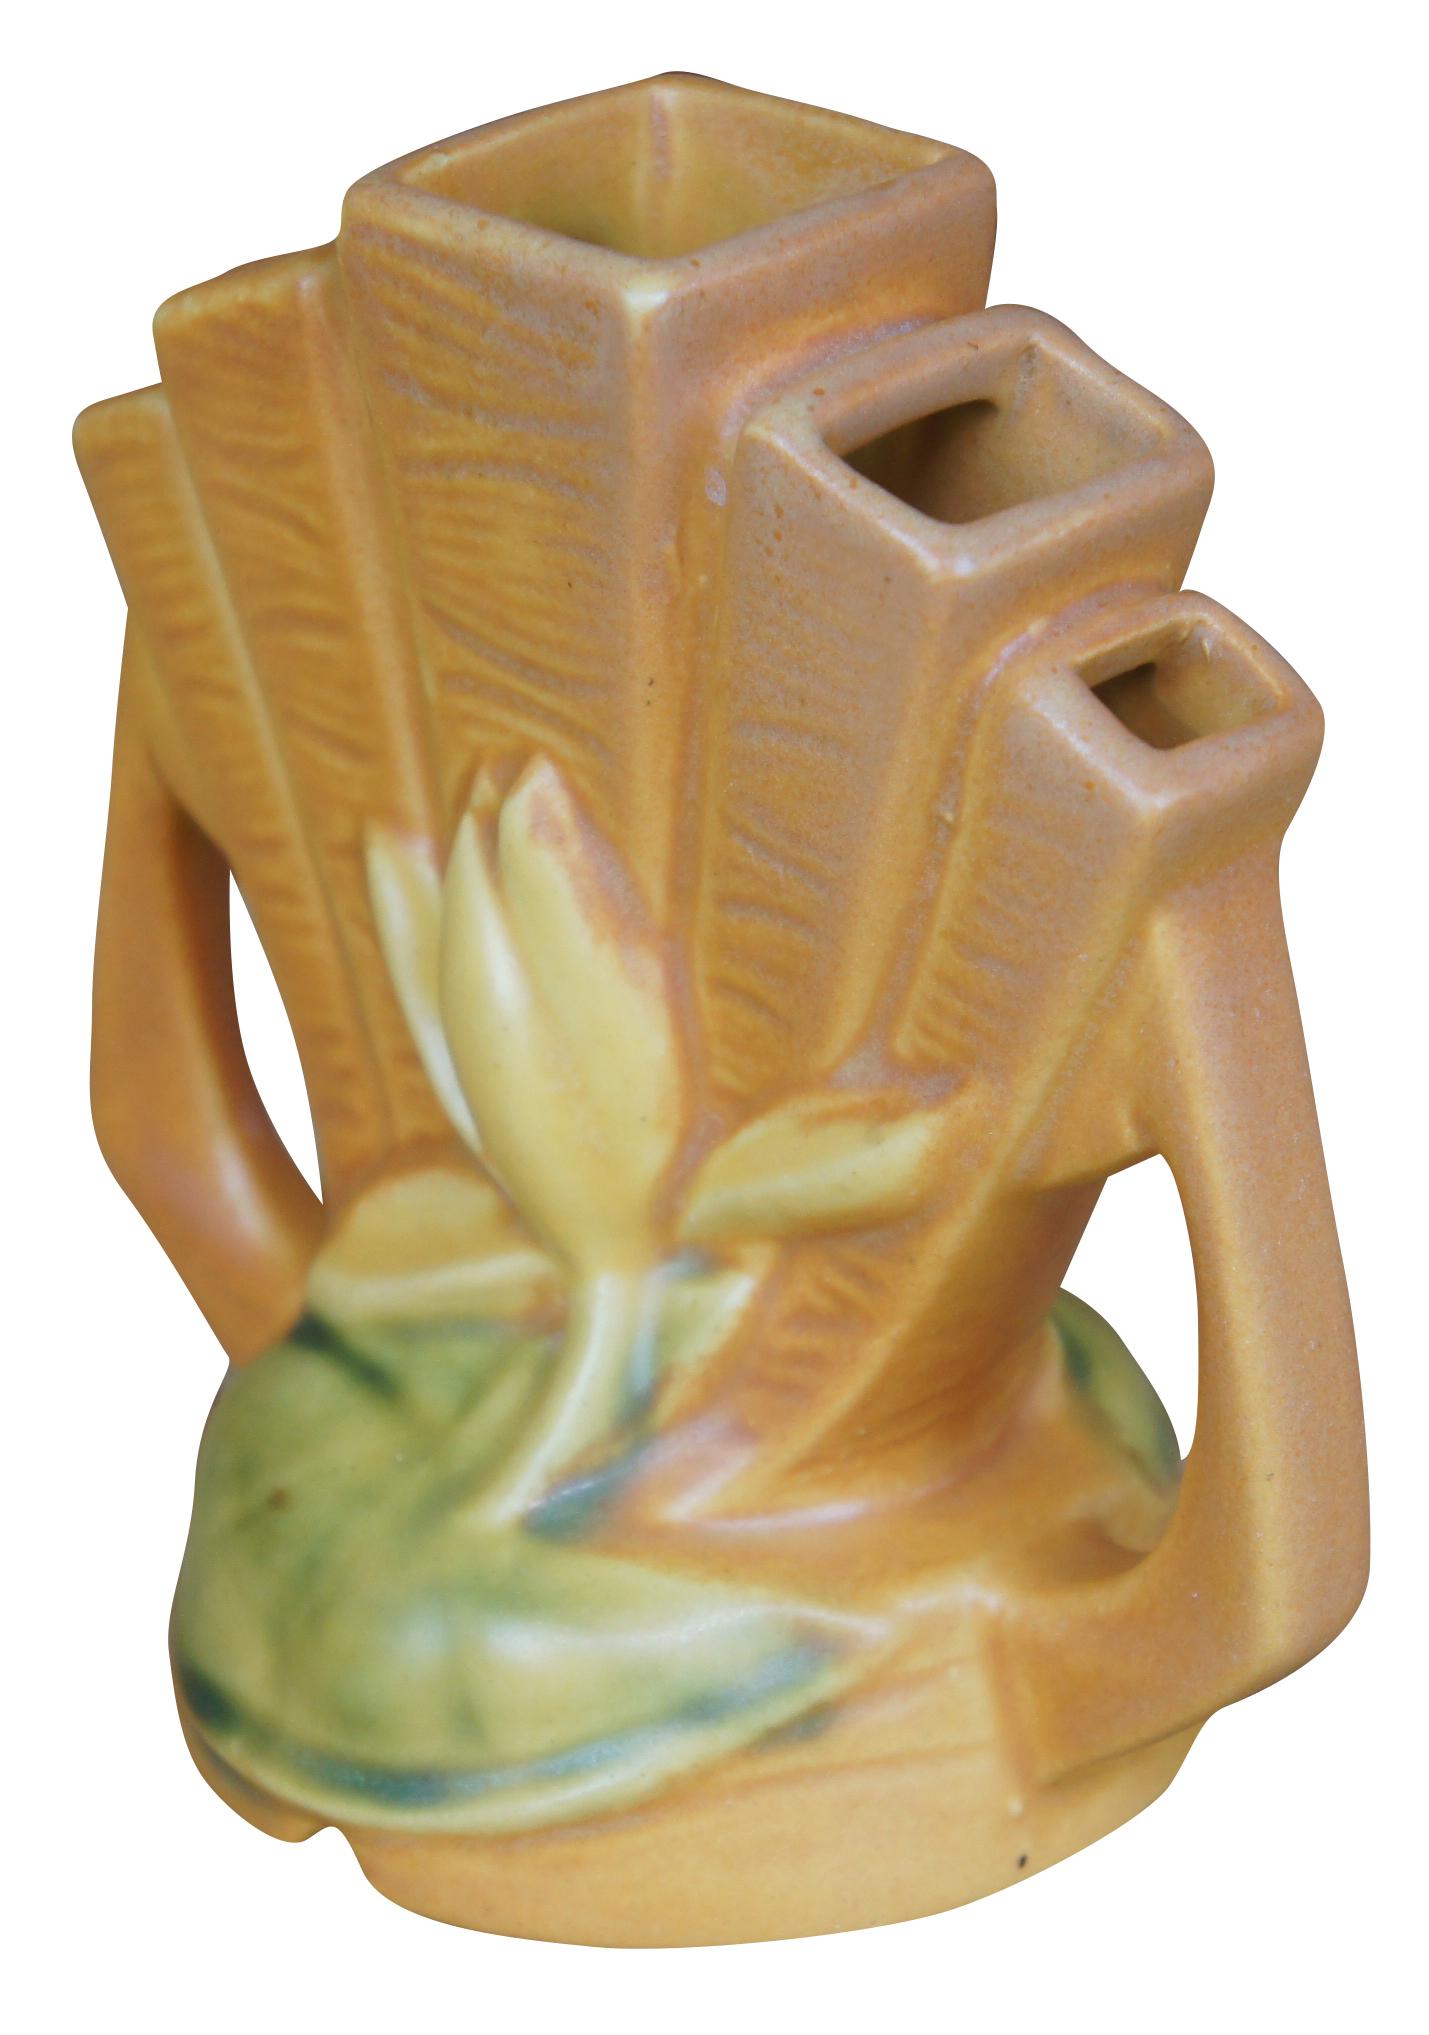 Mid century Roseville Pottery water lily flower frog or bud vase featuring orange glaze with five fingers and floral motif. Circa 1940s. Measure: 48 5